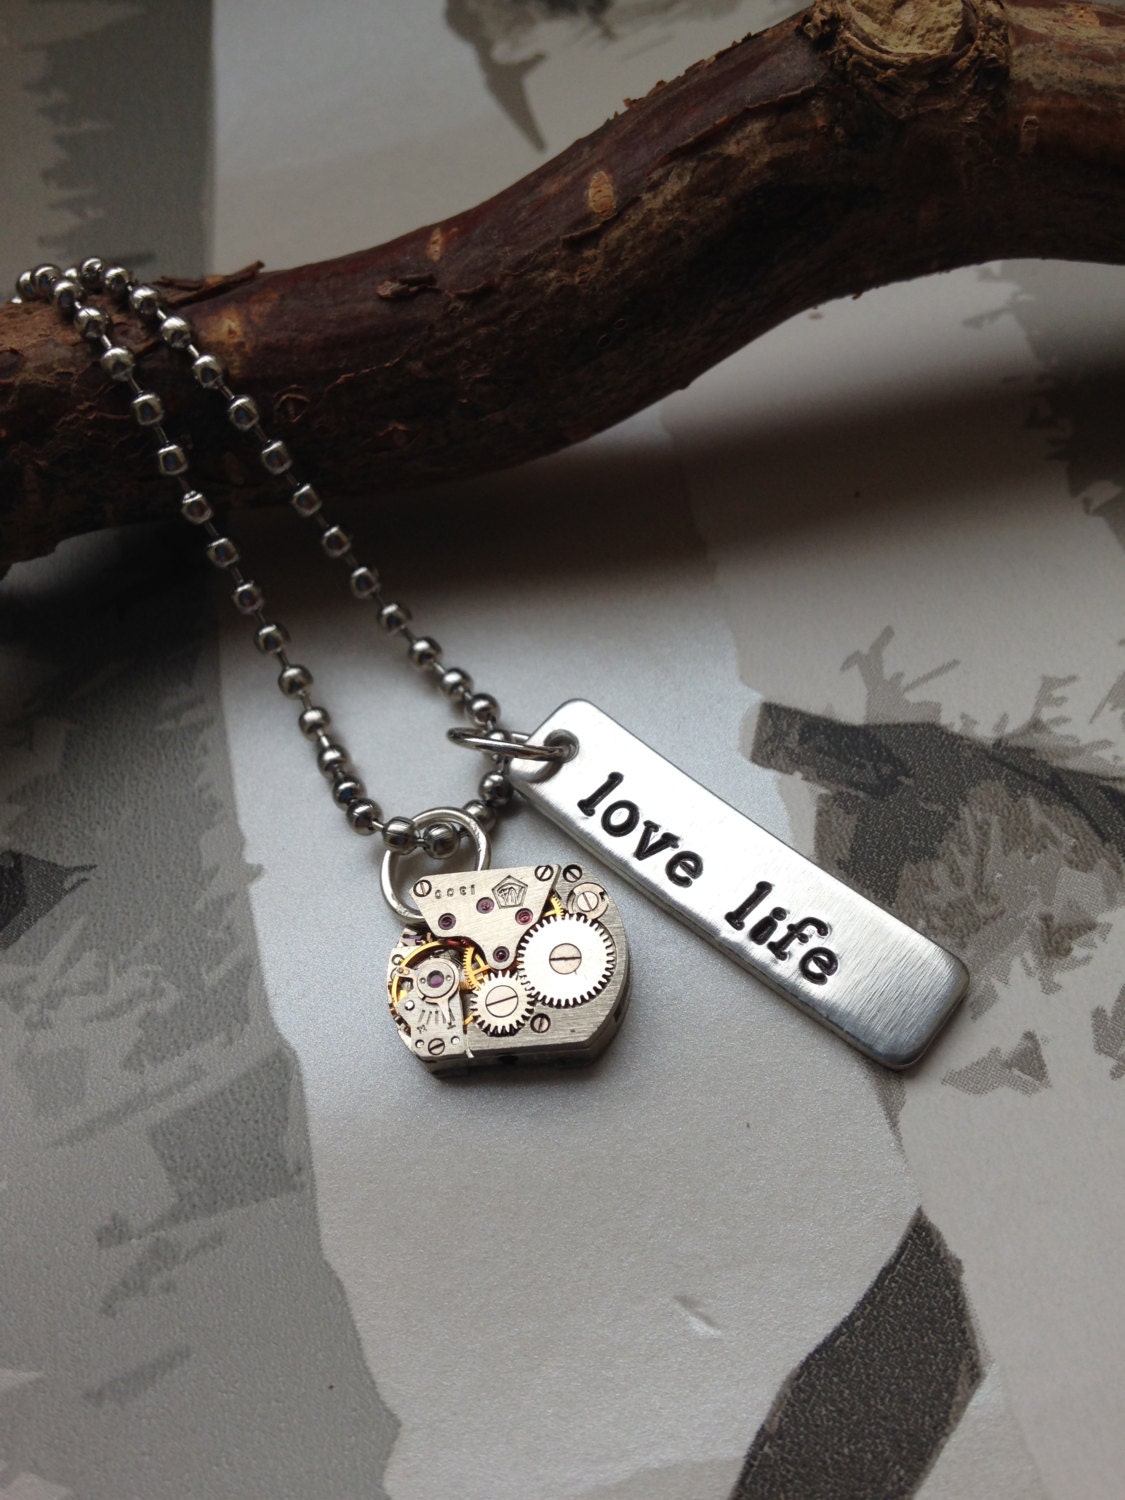 Handmade Love life watch necklace | Hand stamped necklace | Love | Time | Steampunk